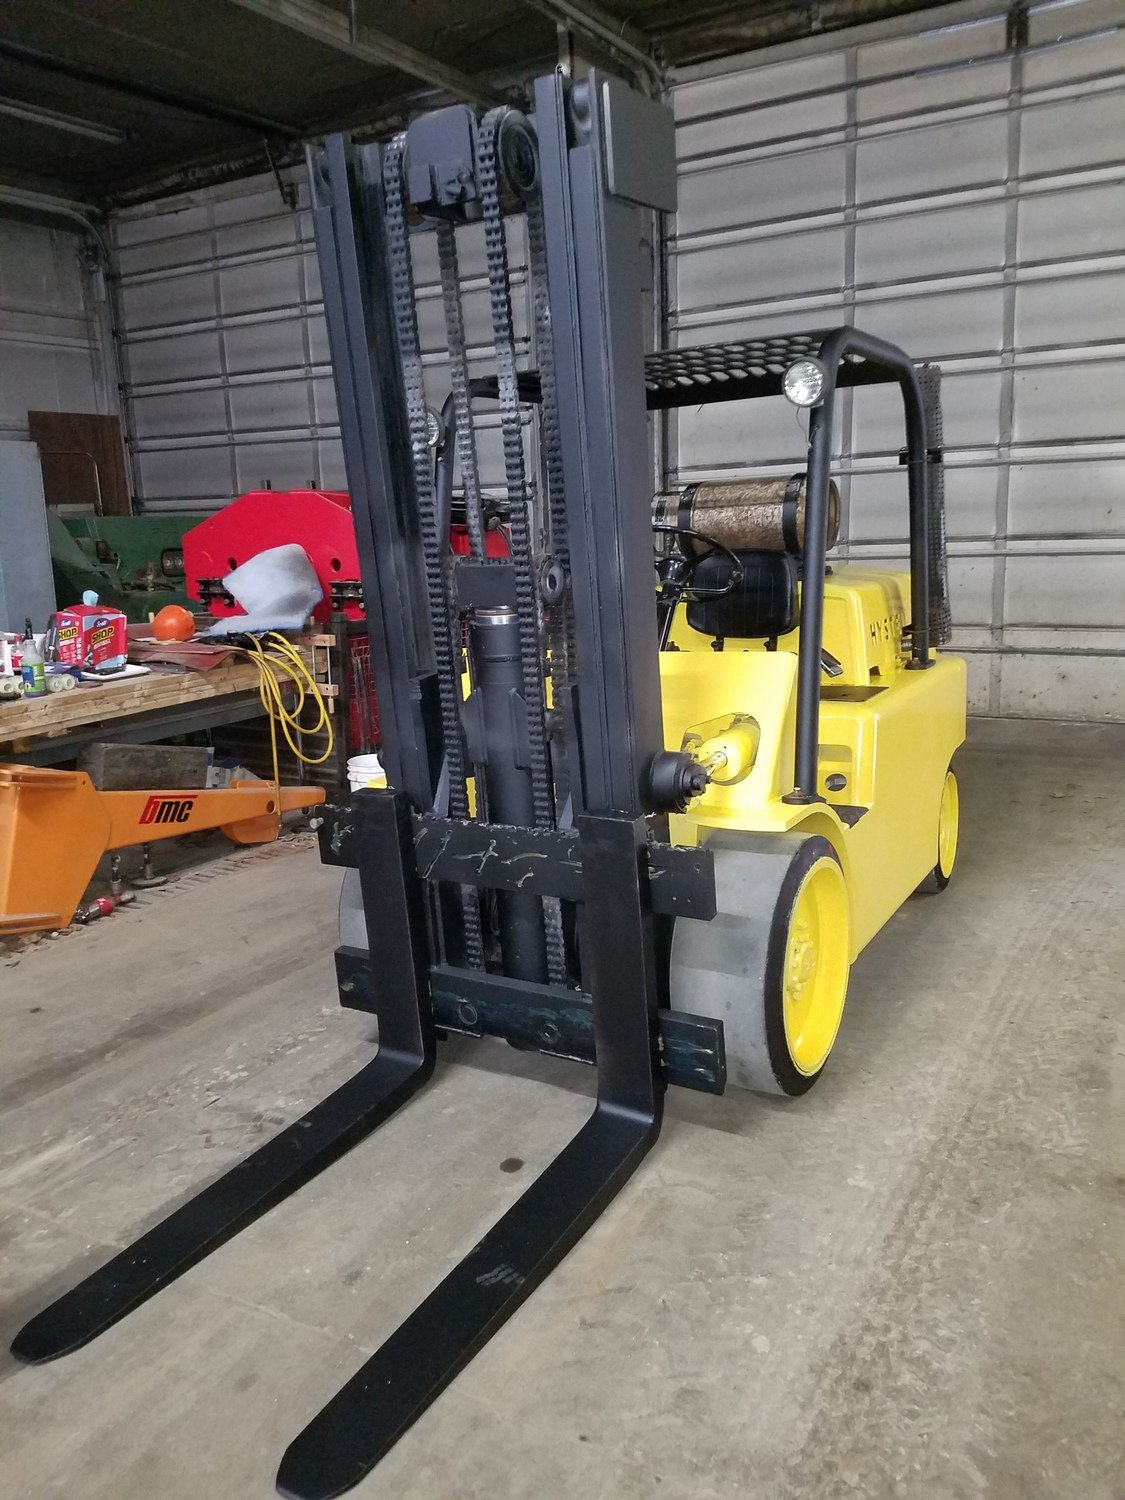 7.5 Ton Forklift For Sale Hyster S150